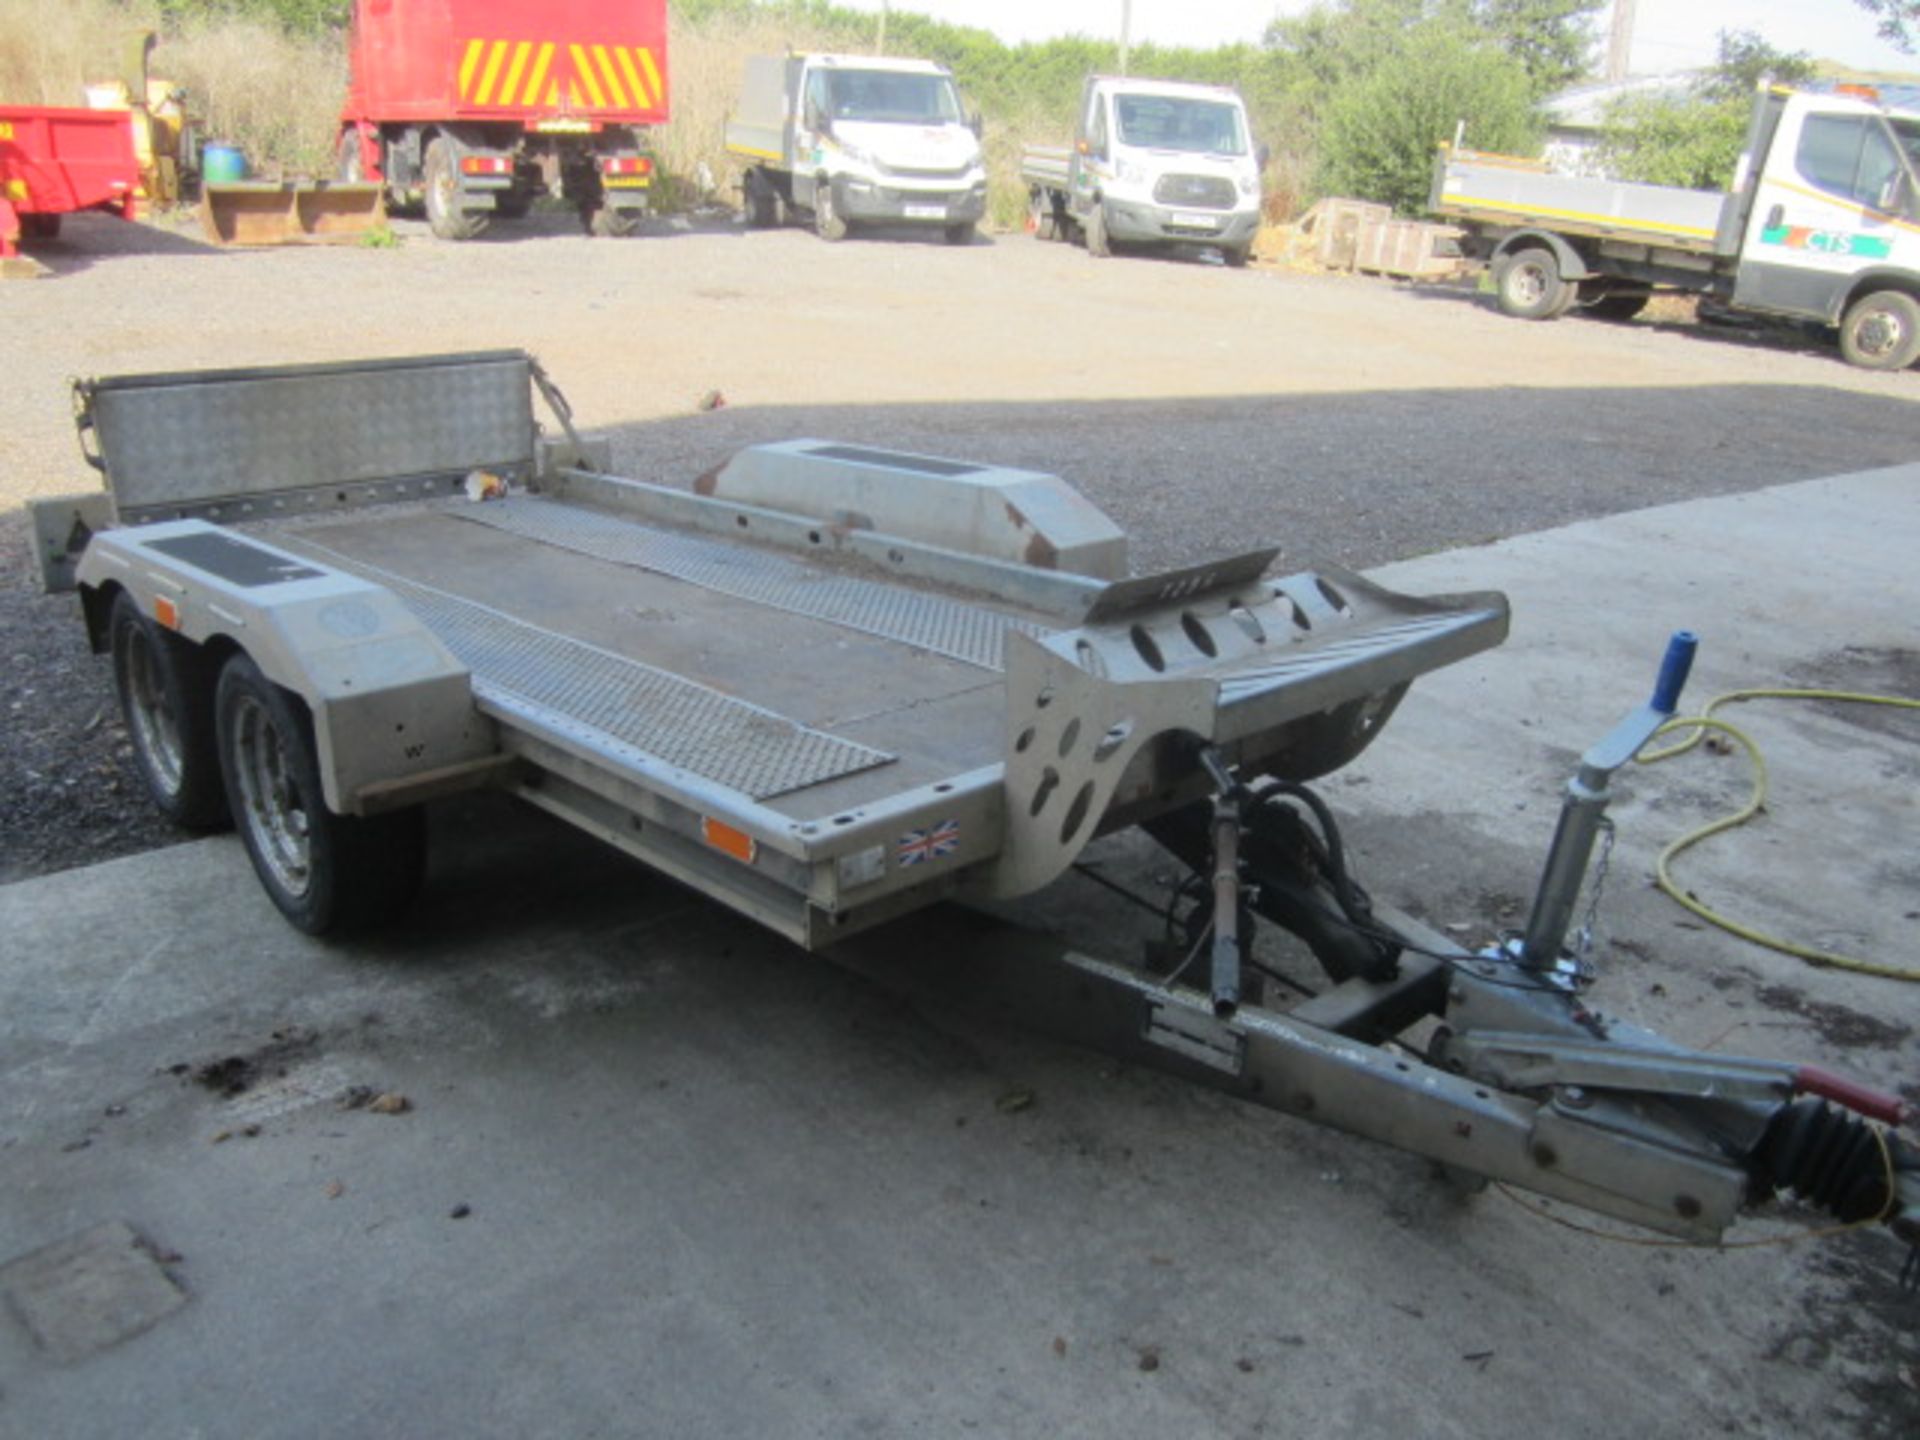 Brian James twin axle plant trailer, serial number SJBSTRJBP8D106249, with hydraulic tilt, 1,300kg